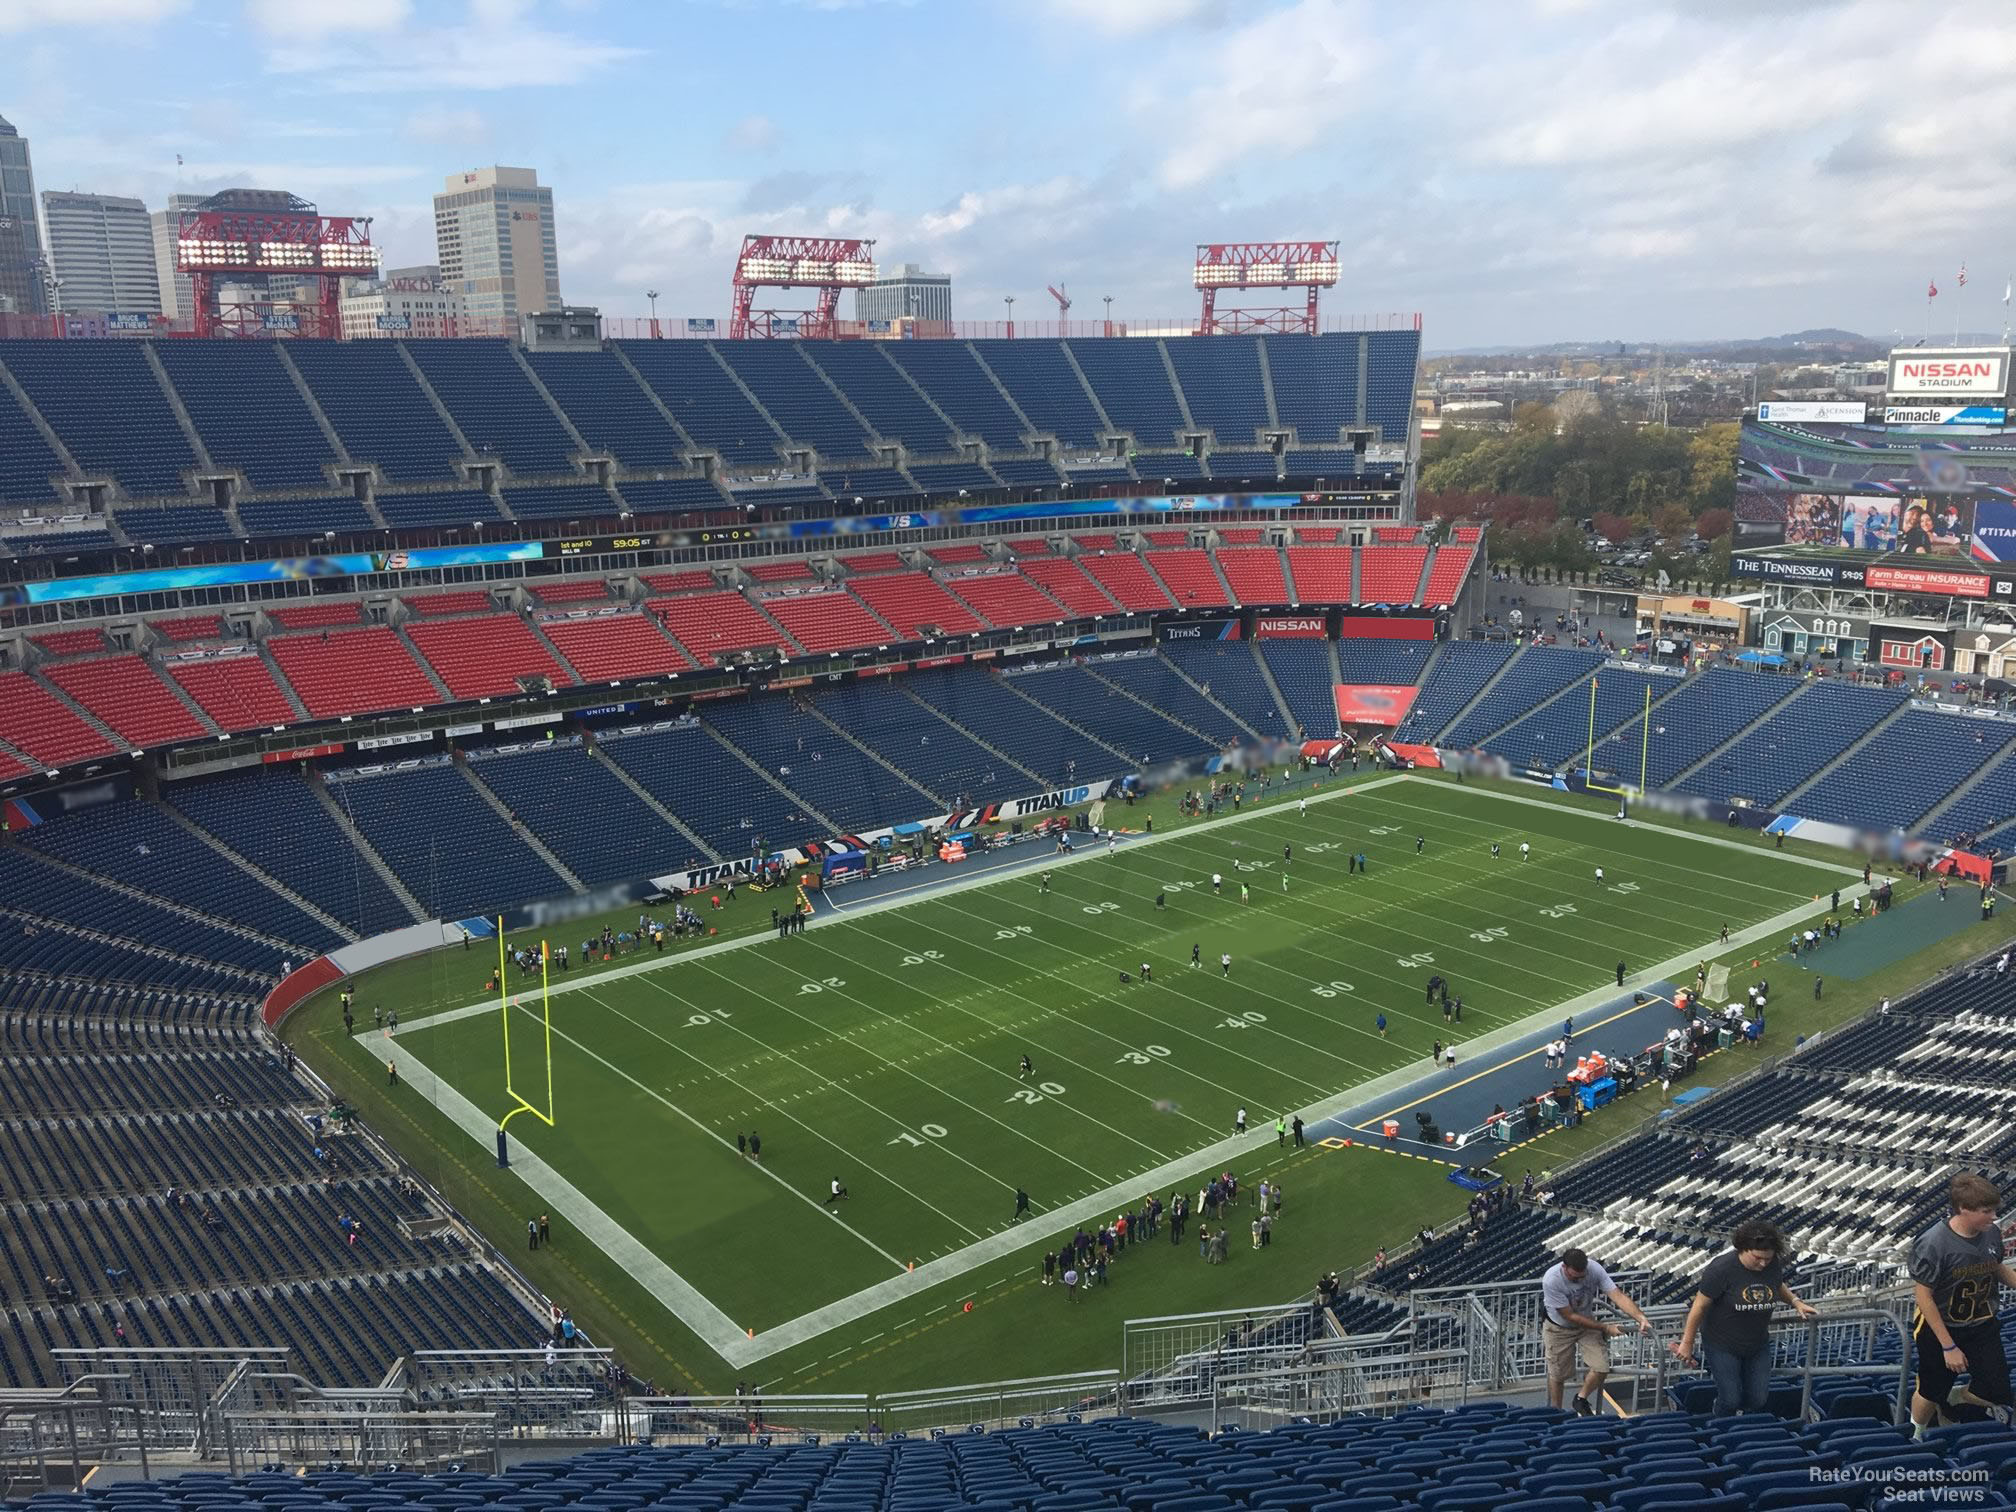 section 319, row aa seat view  for football - nissan stadium